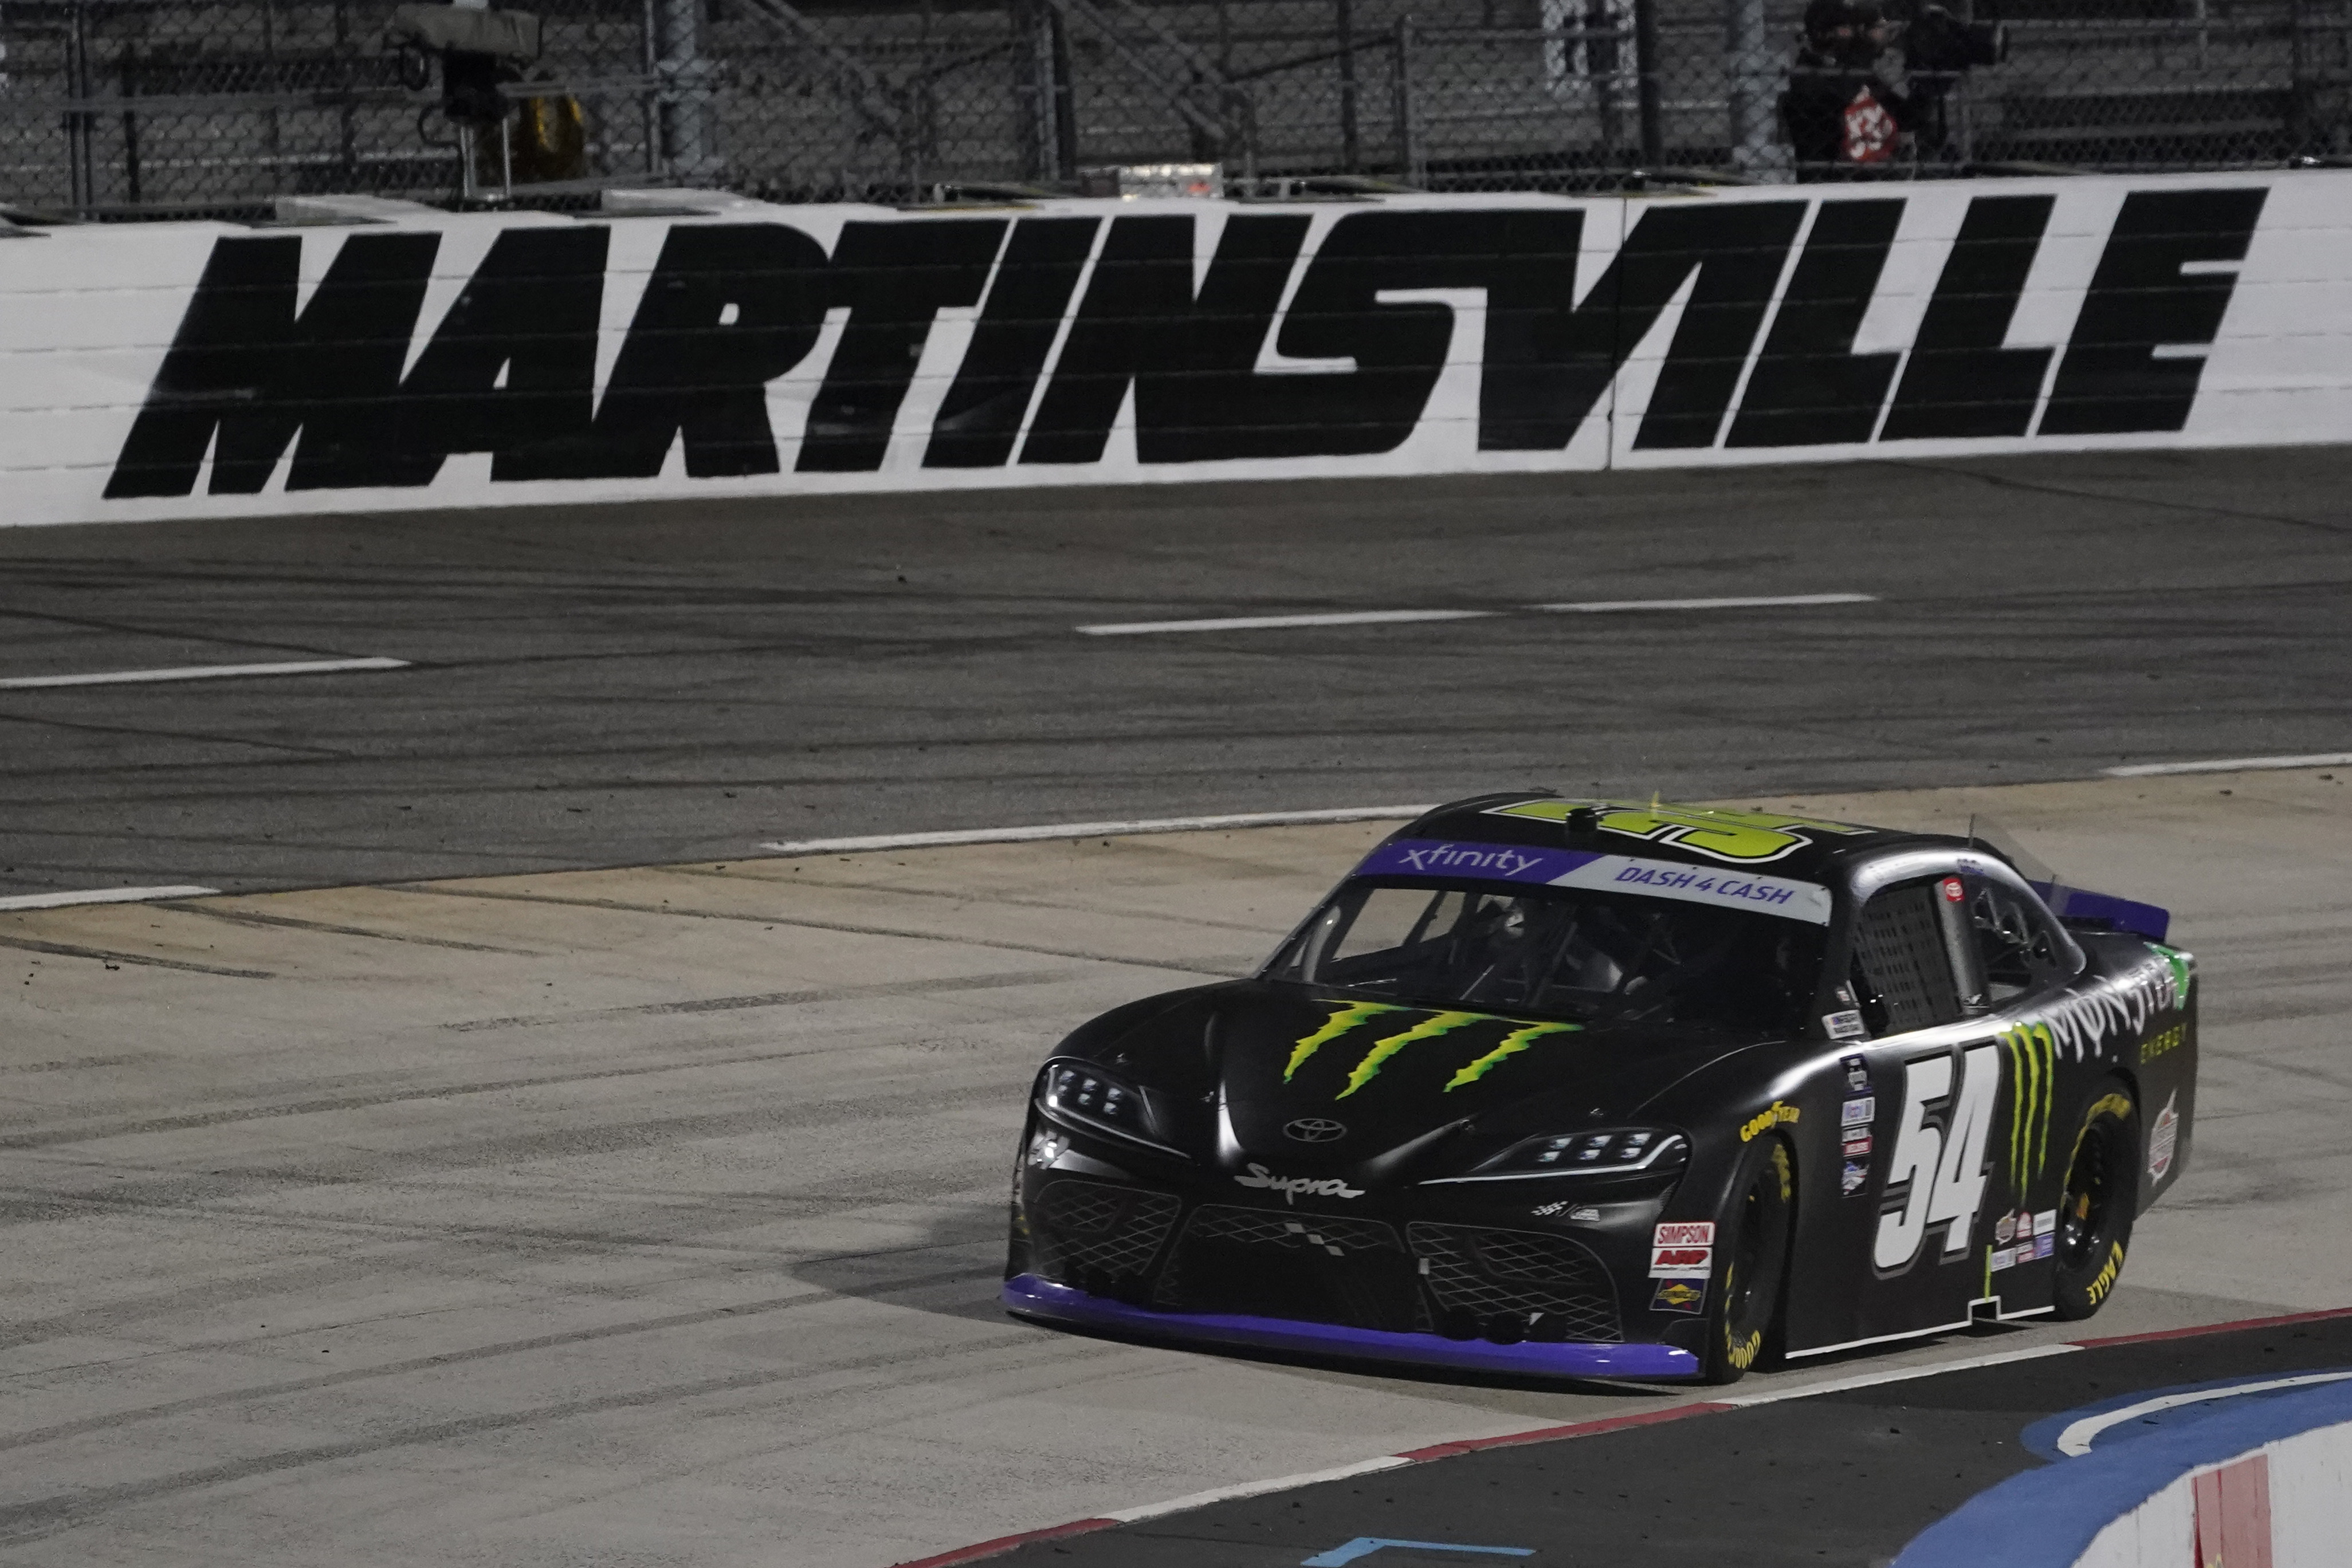 Martinsville Speedway announces complete sellout for Xfinity 500 race